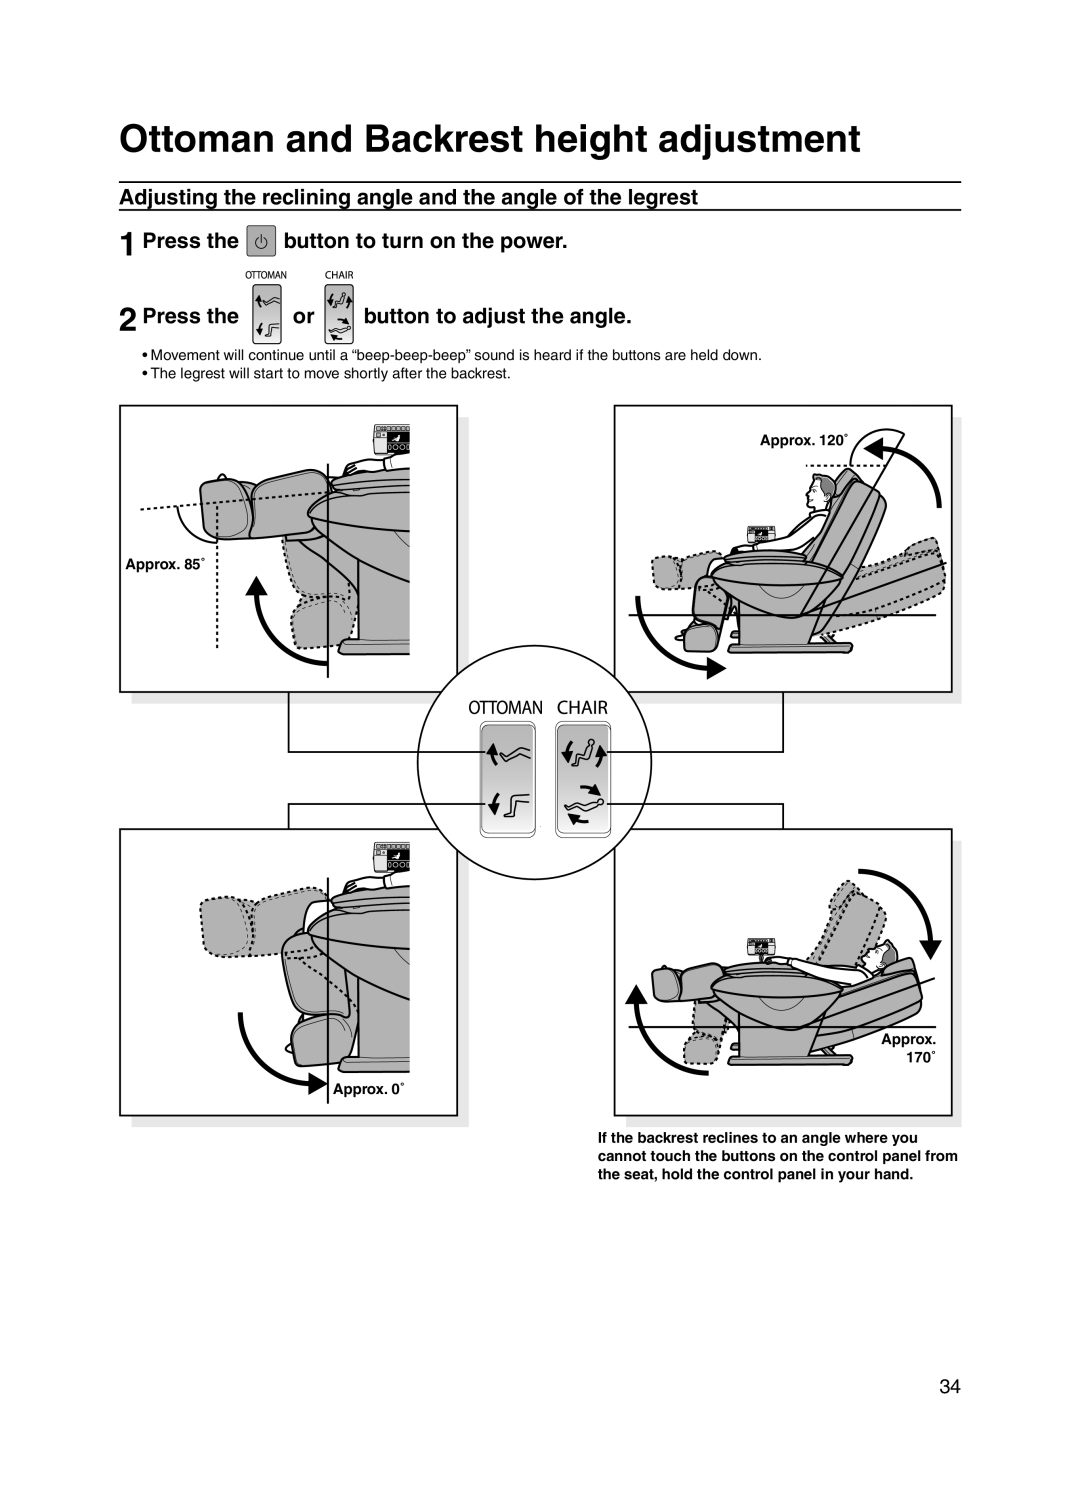 Panasonic EP30004 manual Ottoman and Backrest height adjustment, Press the or button to adjust the angle 